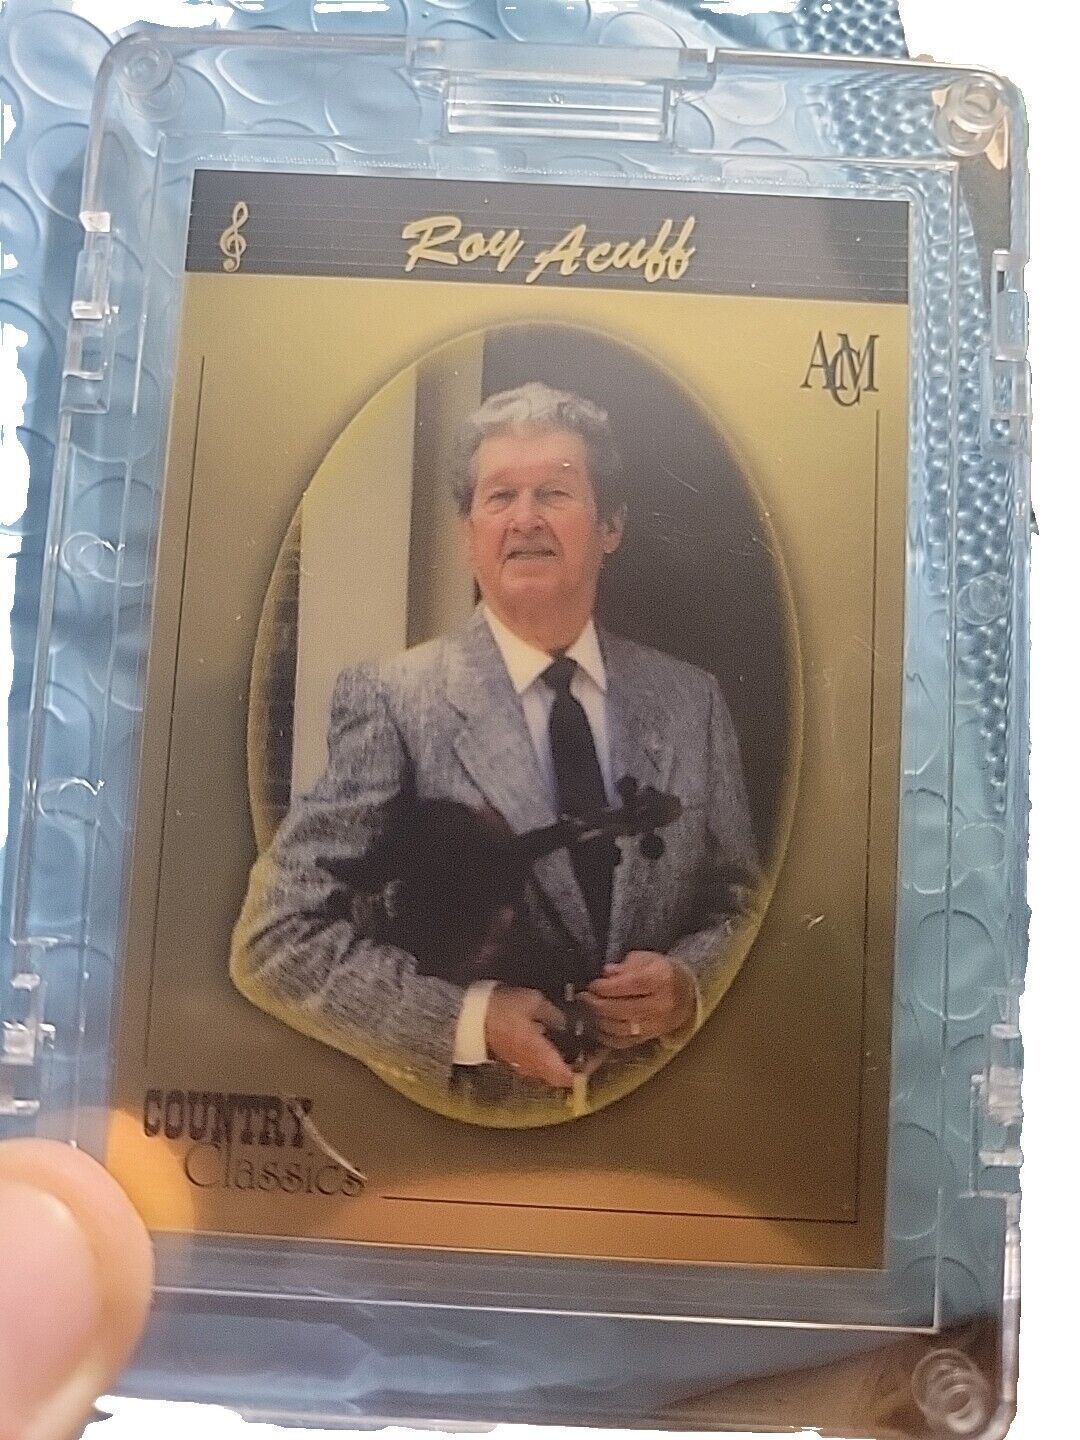 Country Music Classics Series 1 Roy Acuff Gold Card 999.9%(1 Gram)Pure Gold#259